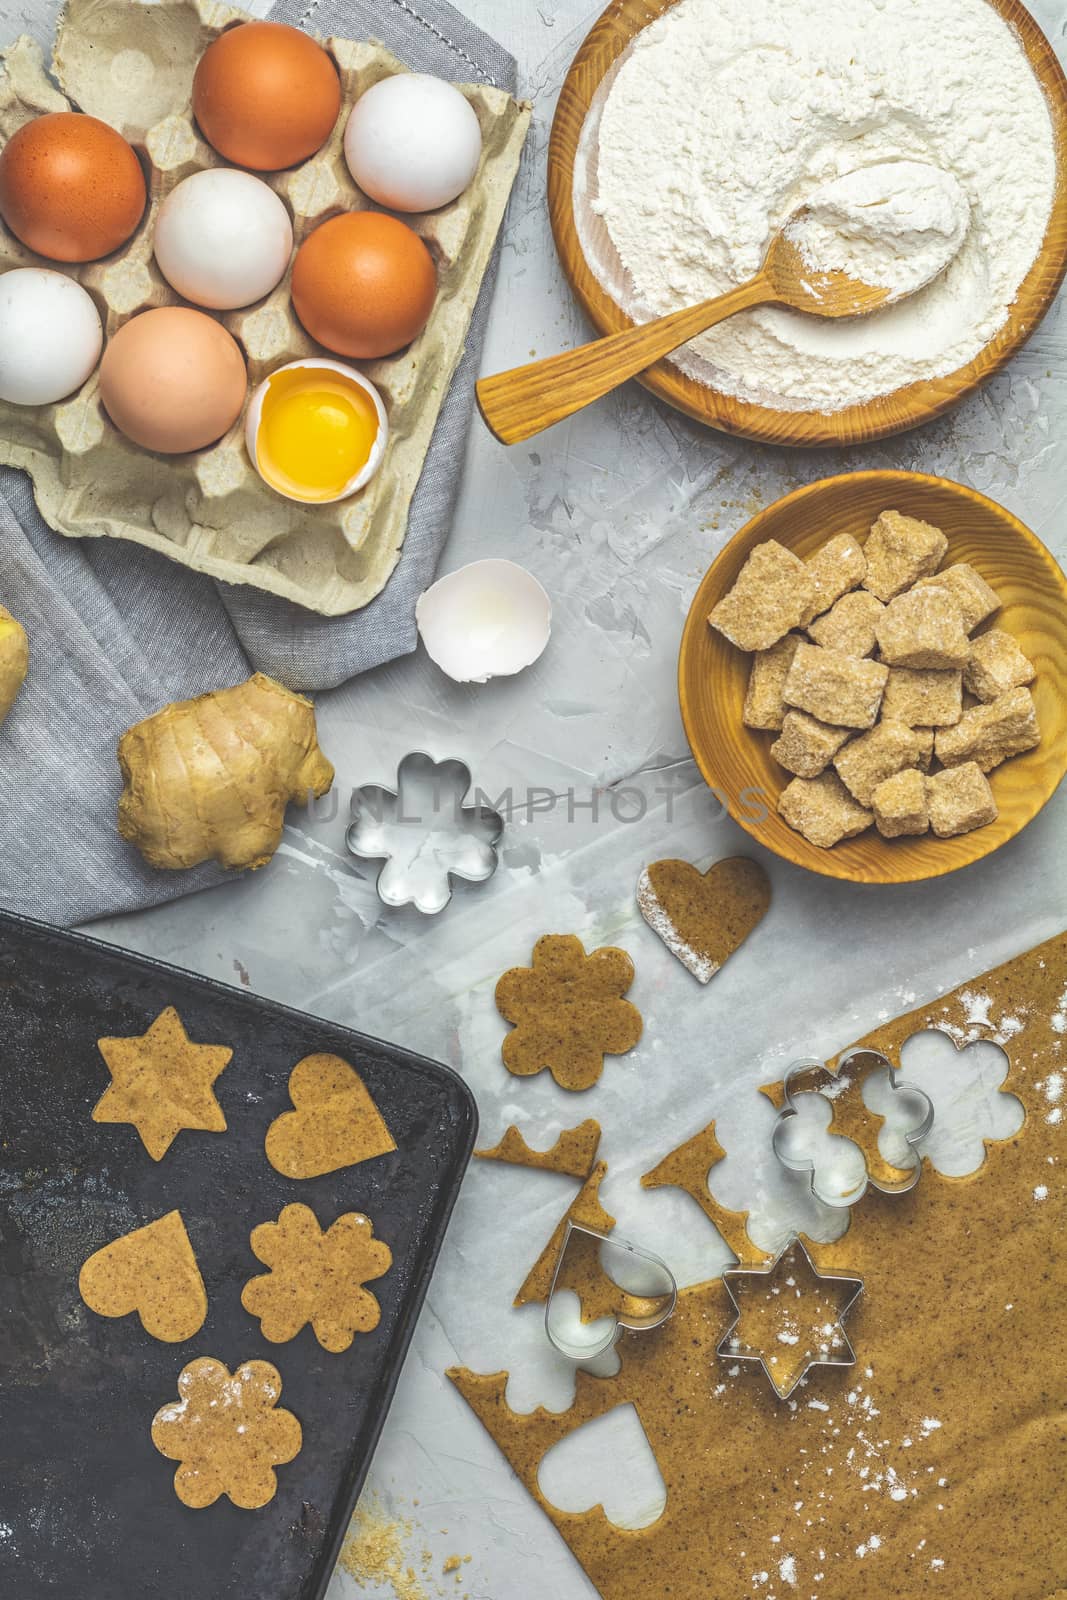 Ingredients for ginger cookies. Dough for baking by ArtSvitlyna